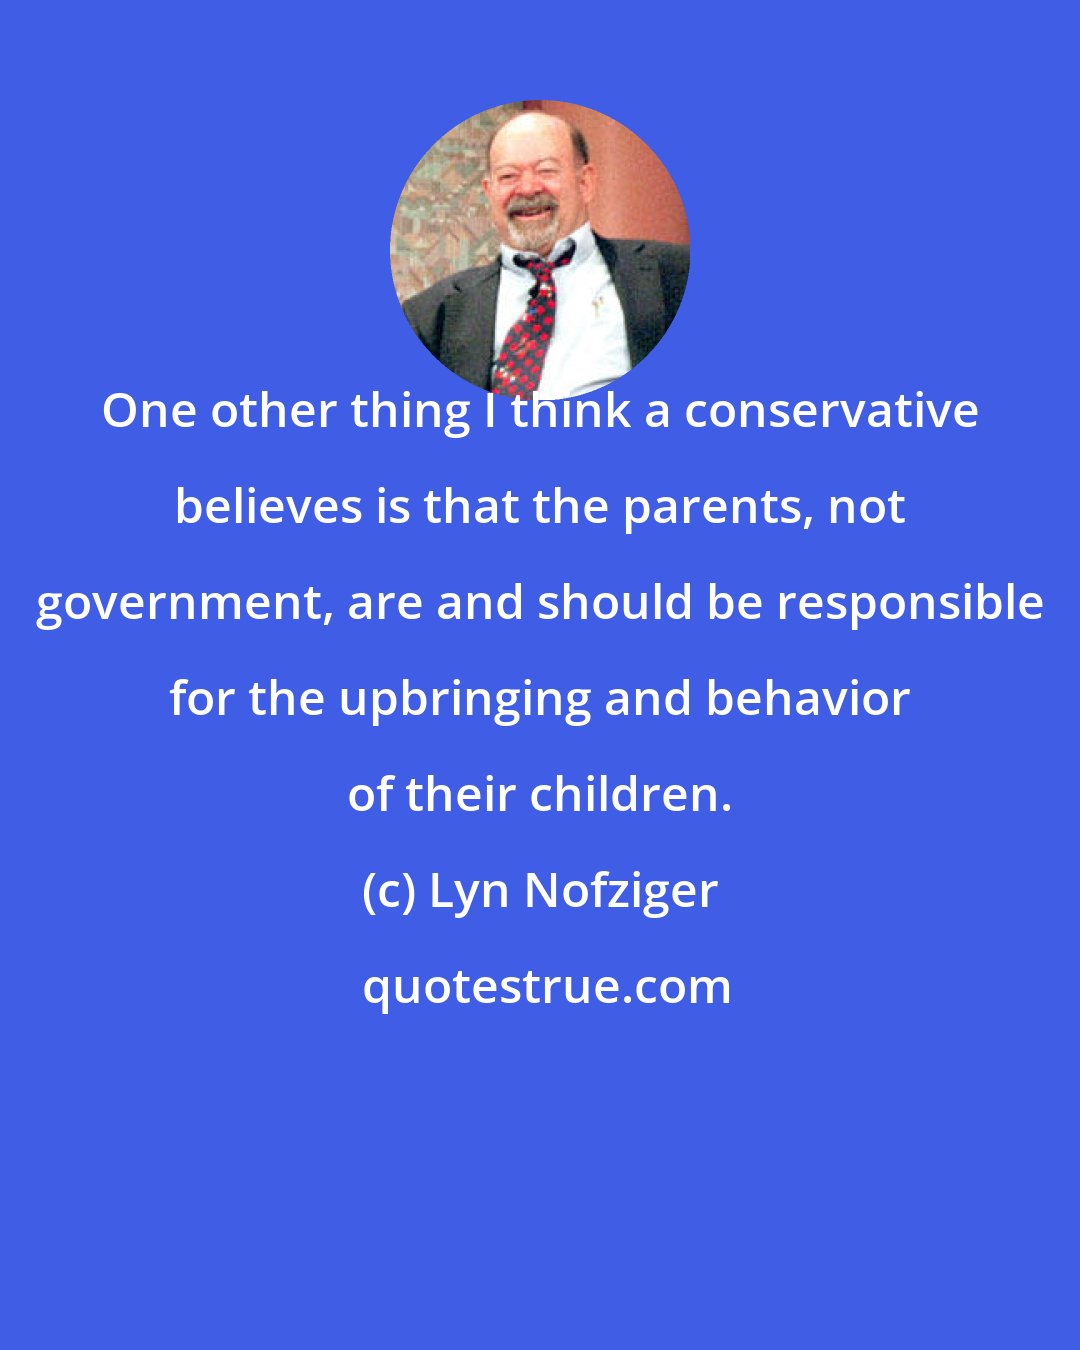 Lyn Nofziger: One other thing I think a conservative believes is that the parents, not government, are and should be responsible for the upbringing and behavior of their children.